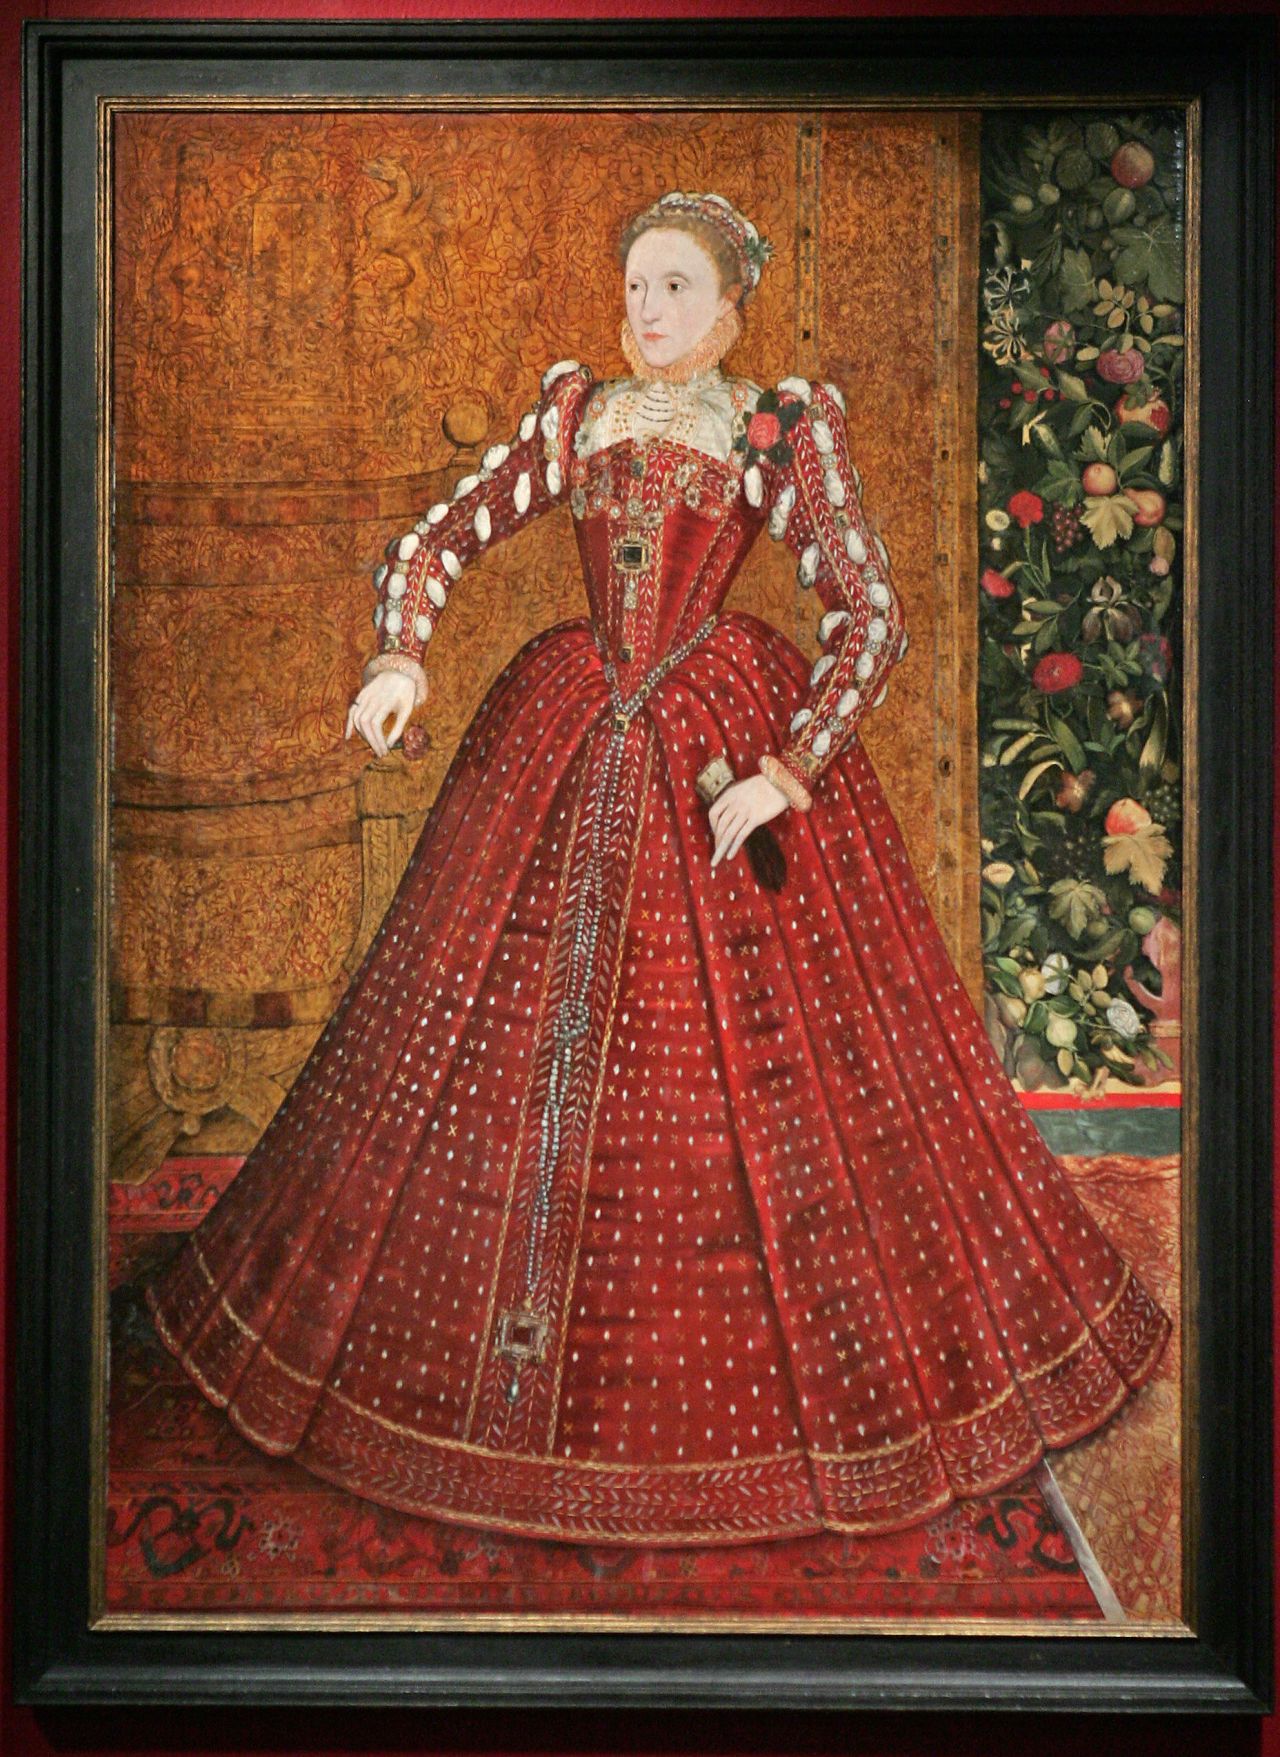 Similarly, Henry VIII's daughter, Elizabeth I, was not expected to rule once he had a male heir; but Edward VI died while still in his teens -- his older sisters Mary and then Elizabeth were both crowned Queen in the decades that followed.